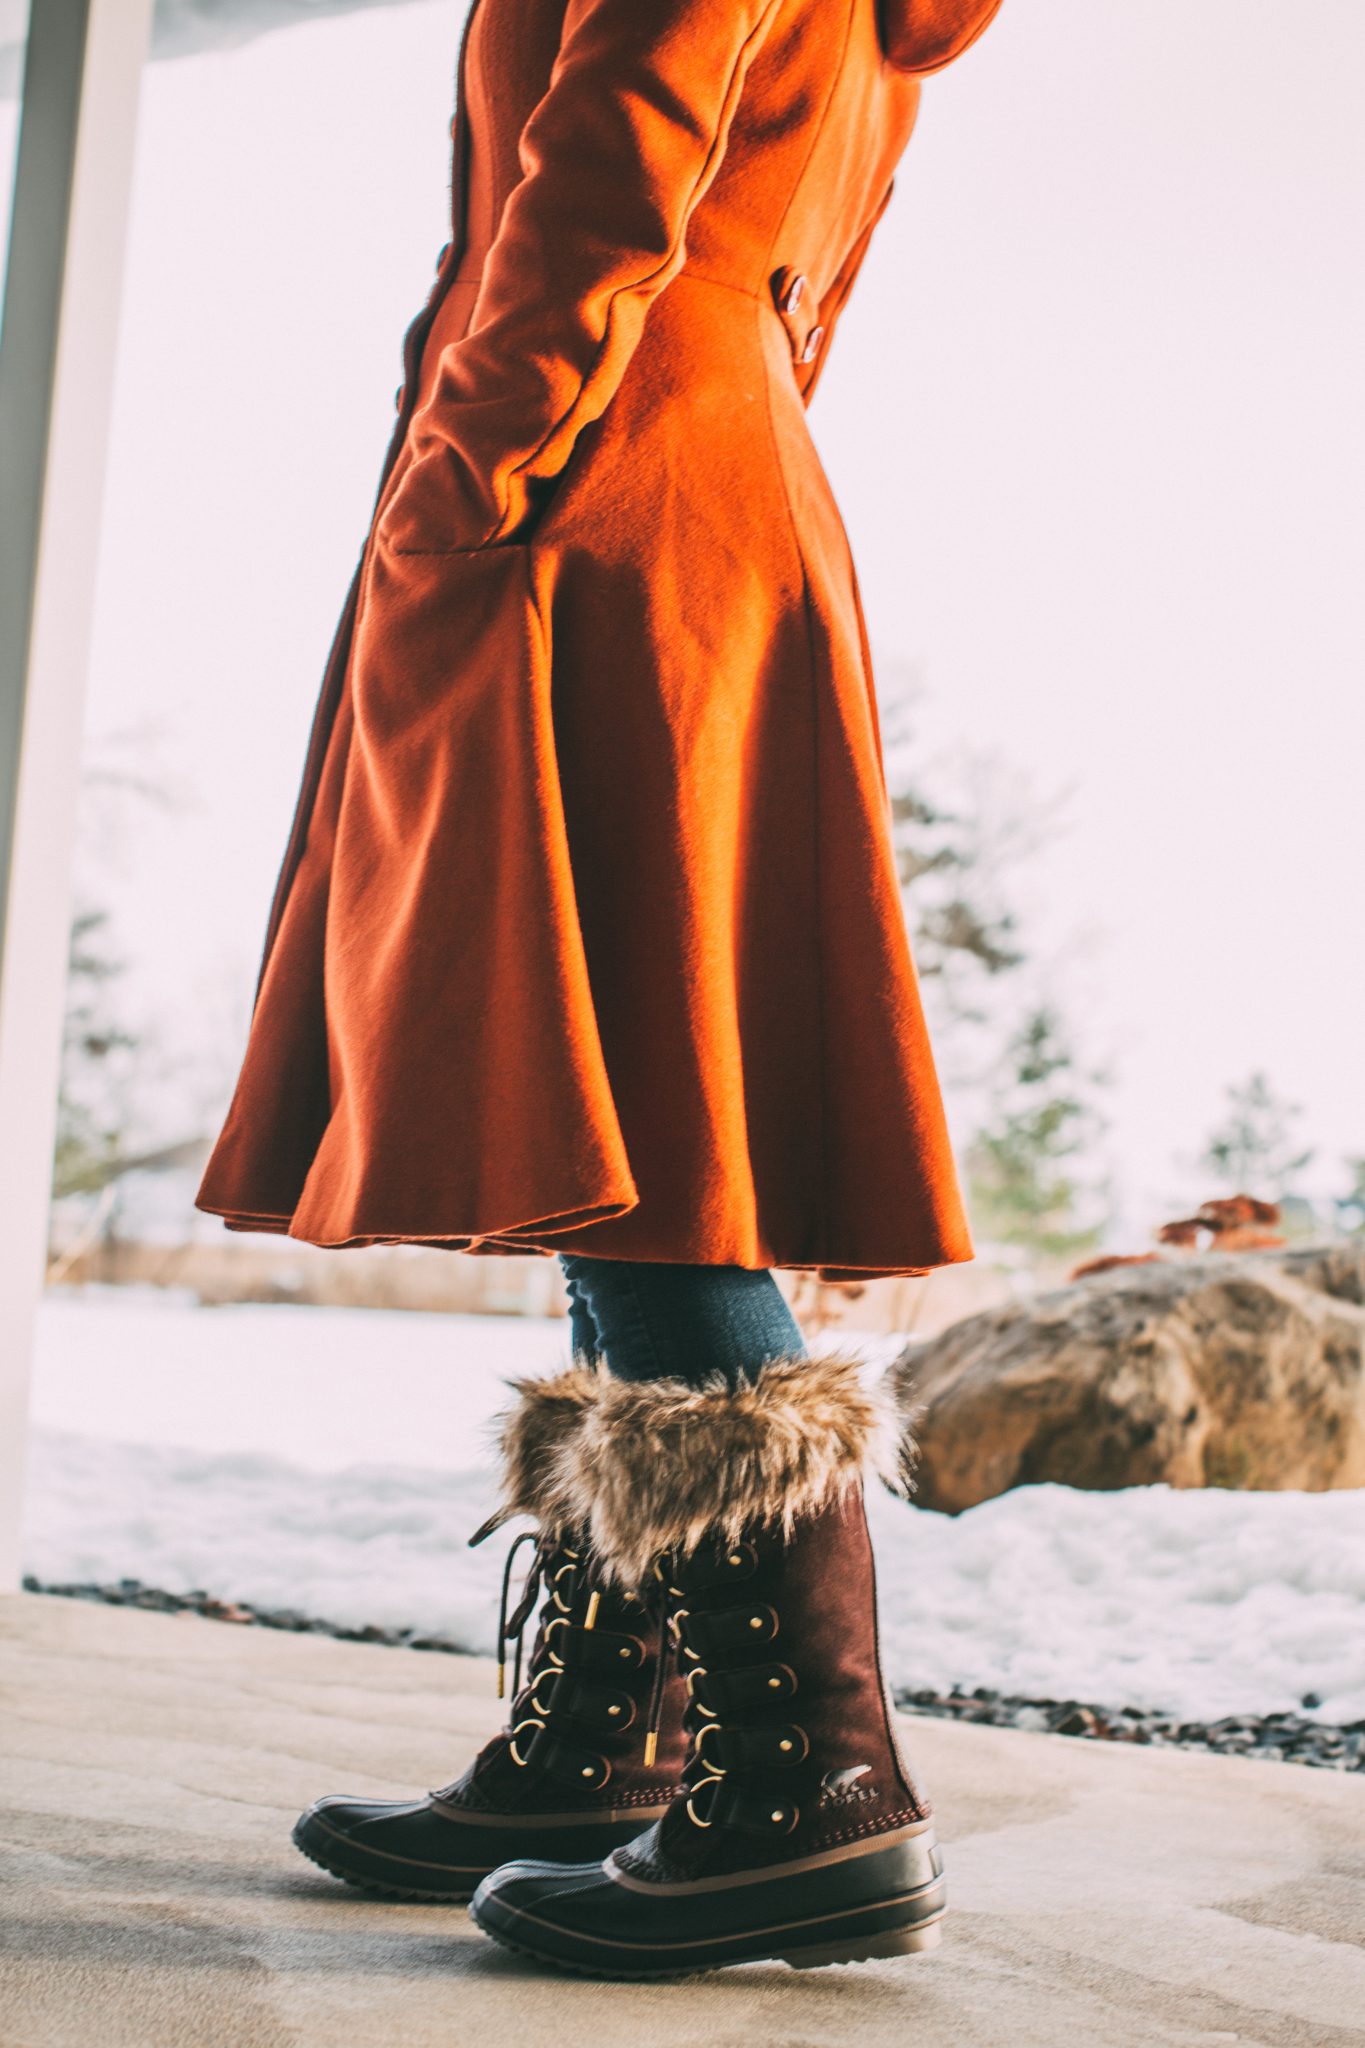 New Sorel Boots from Zappos paired with burnt orange Collectif Swing Coat